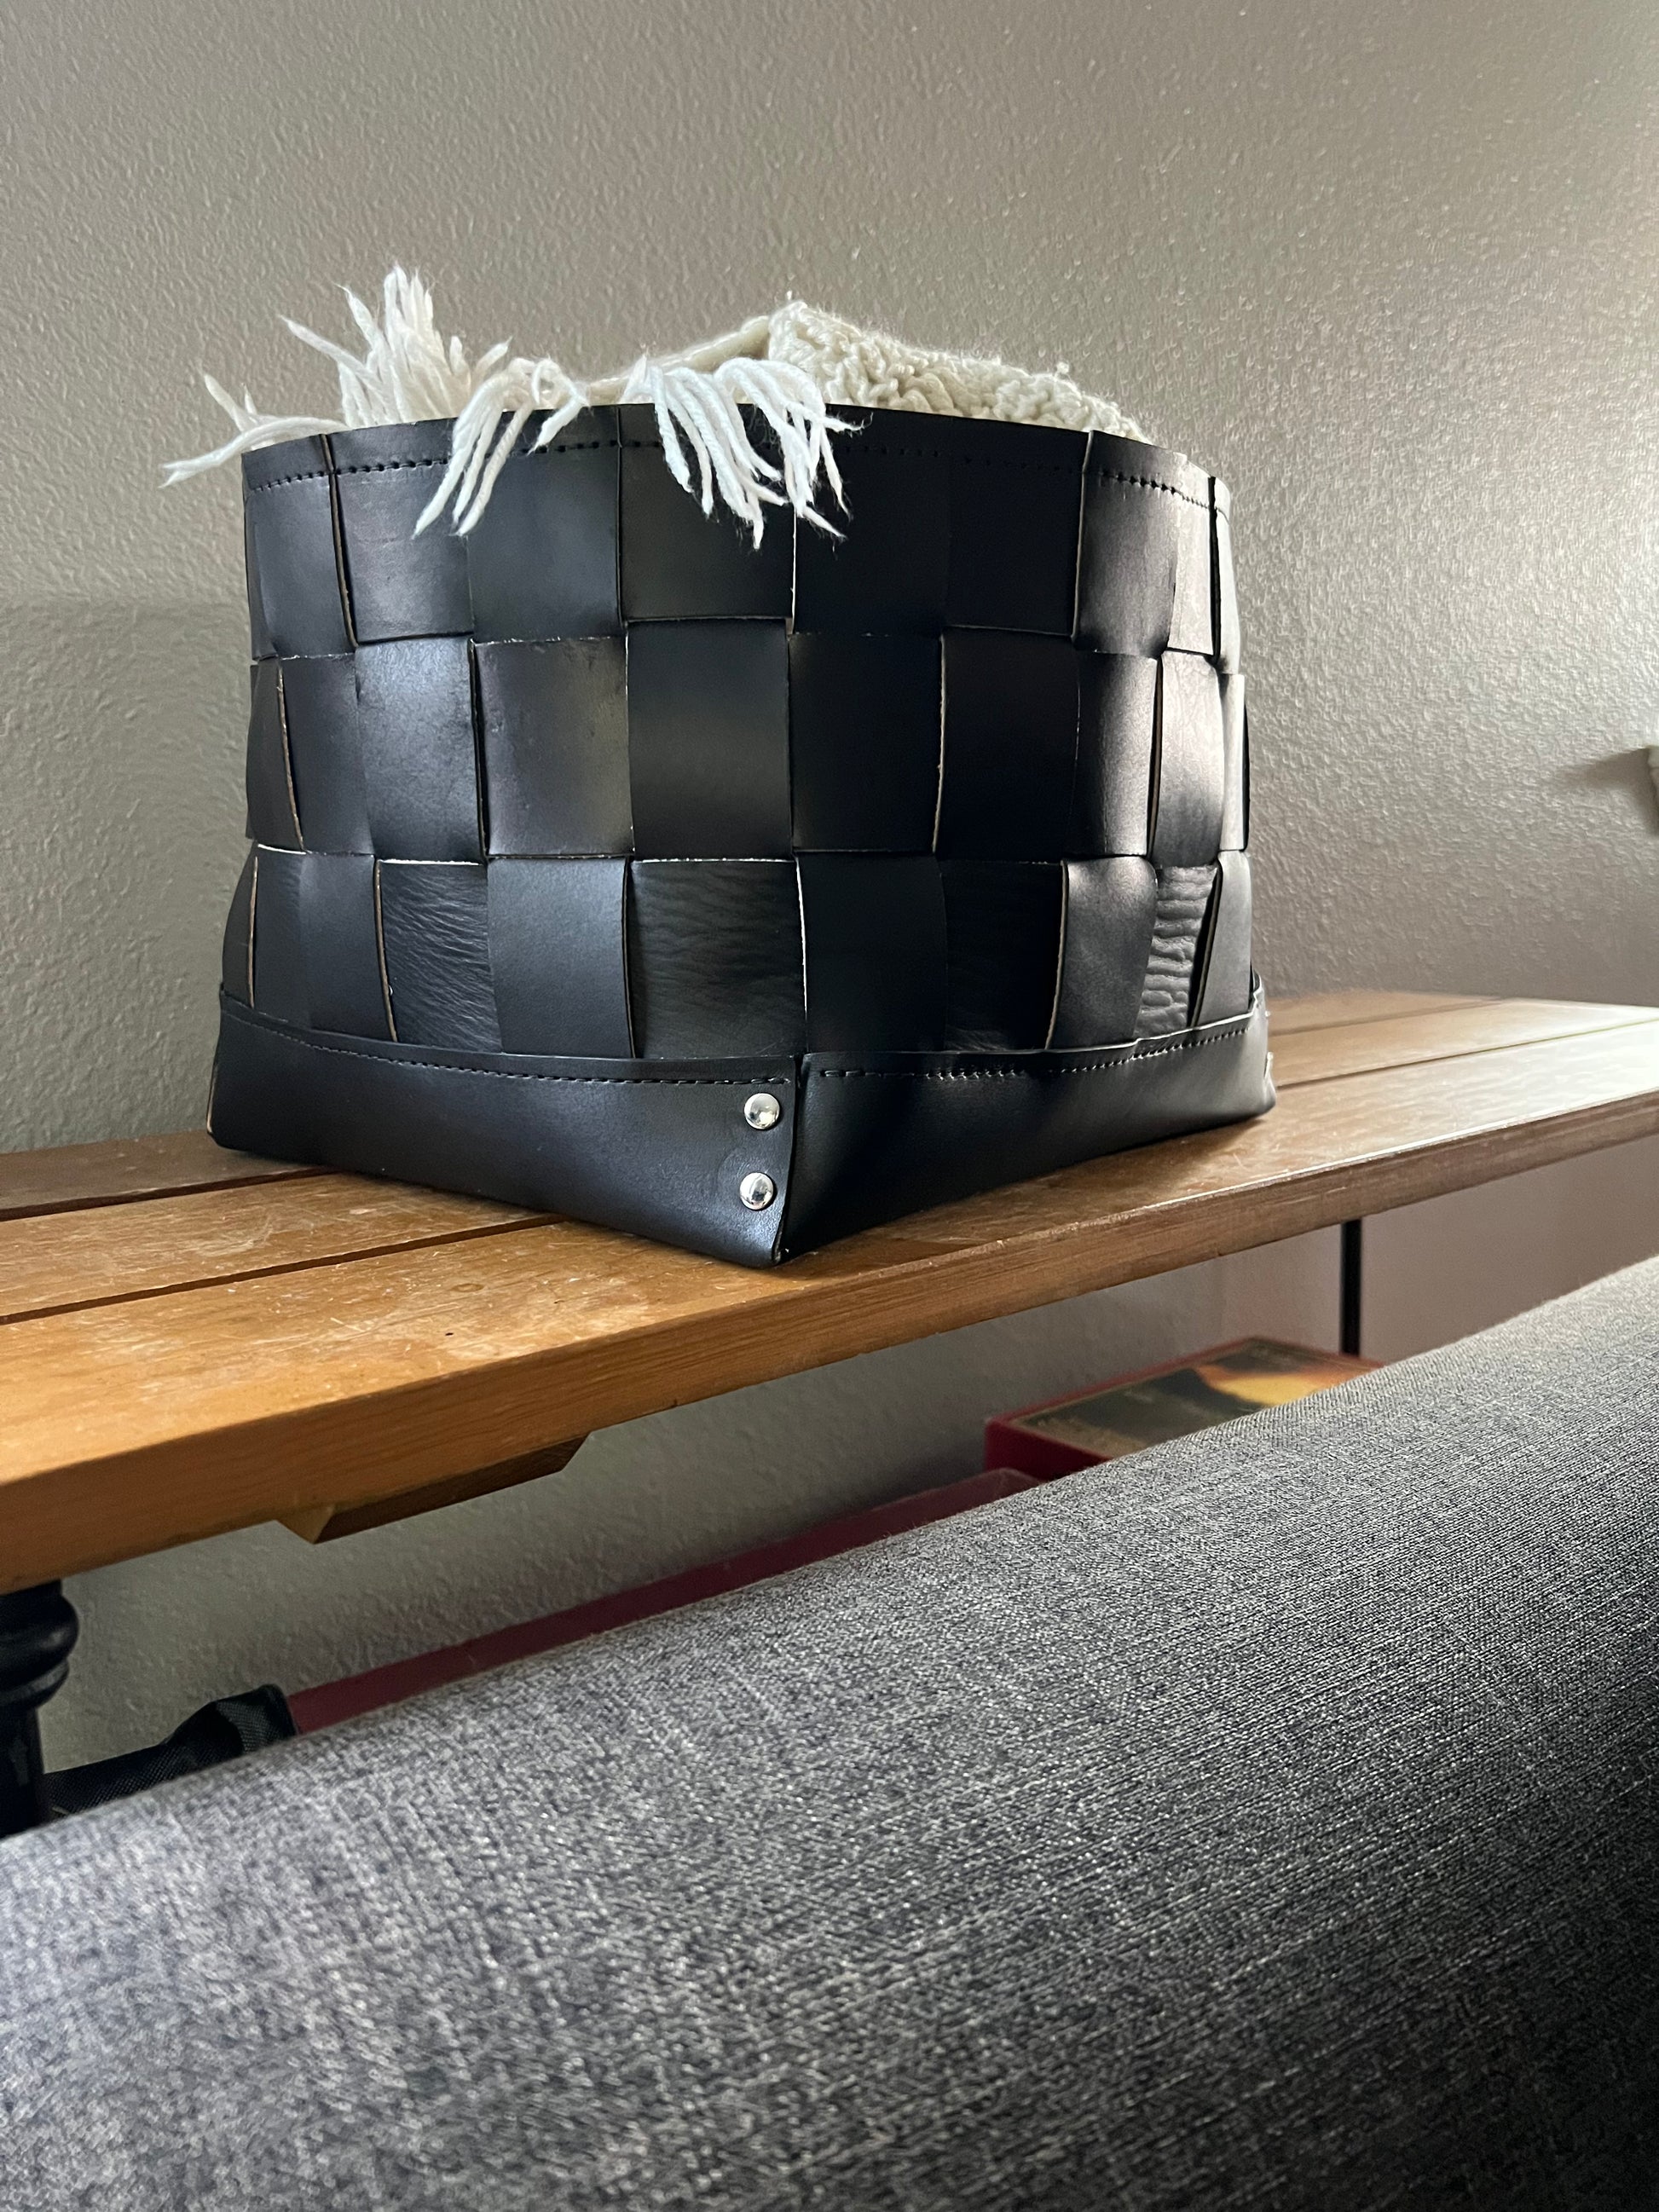 Woven leather bin holds a blanket near a couch.